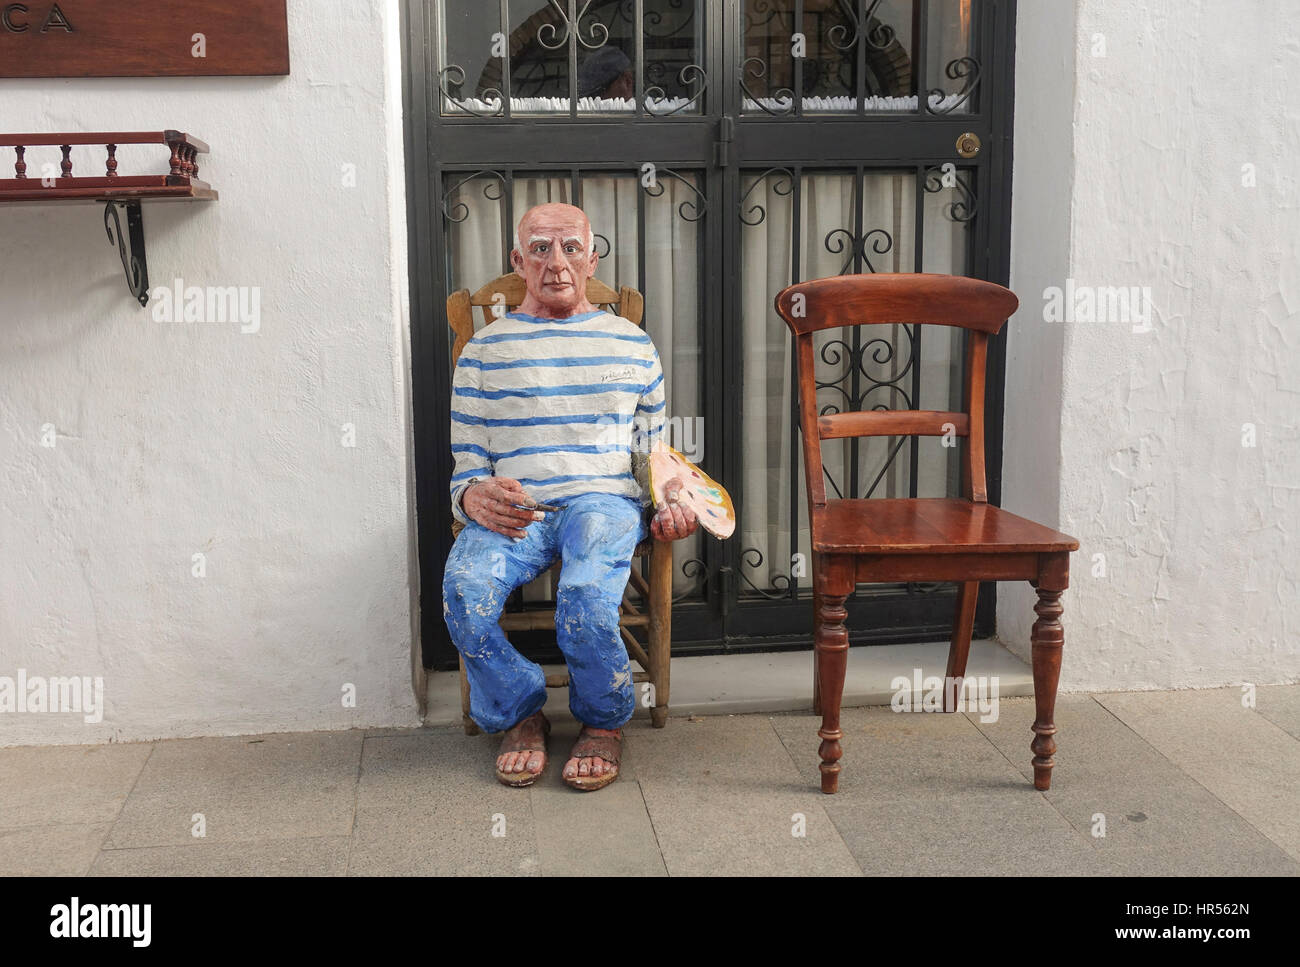 Sculpture in clay of Pablo Picasso sitting on chair in Mijas Pueblo, Andalusia, Spain Stock Photo